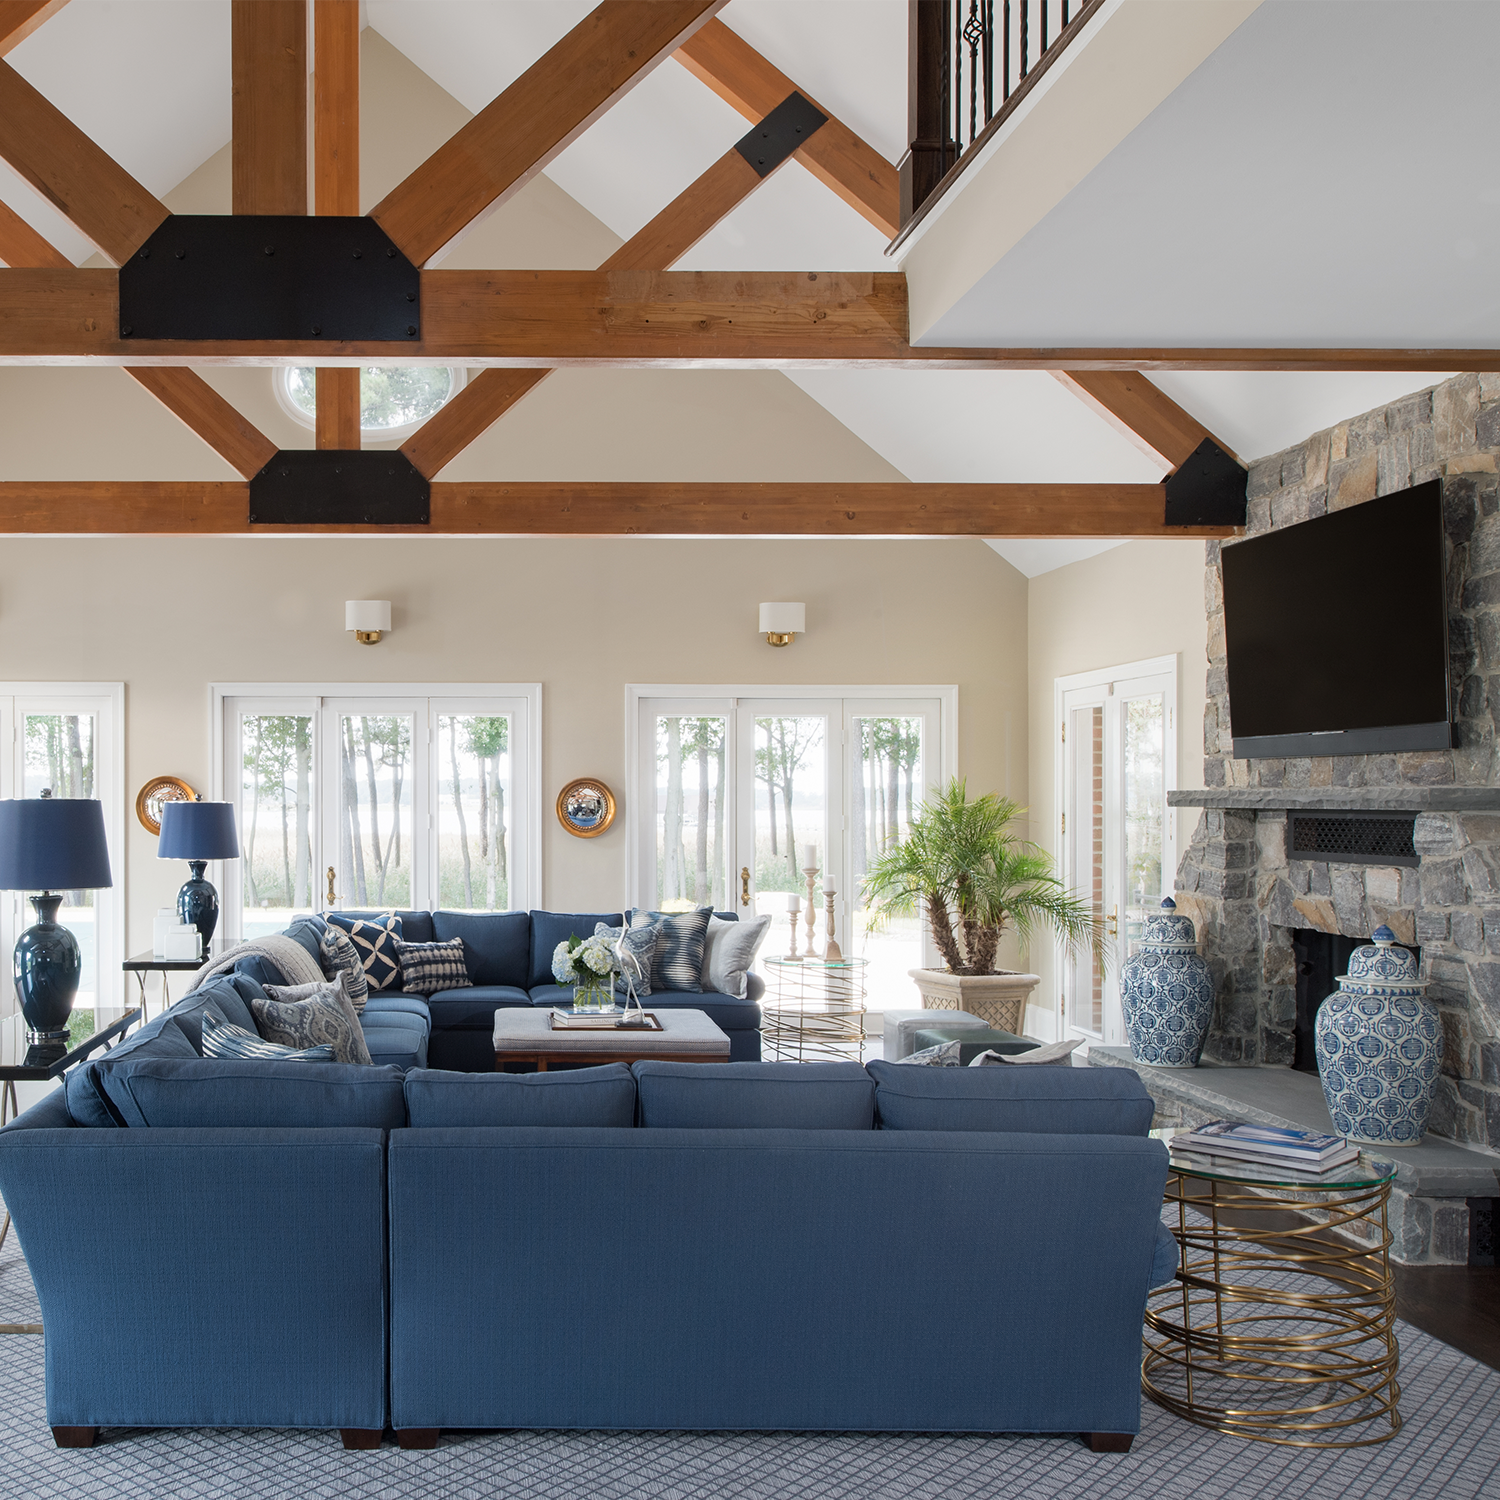 Great room with vaulted ceilings, wood beams, and blue sectional